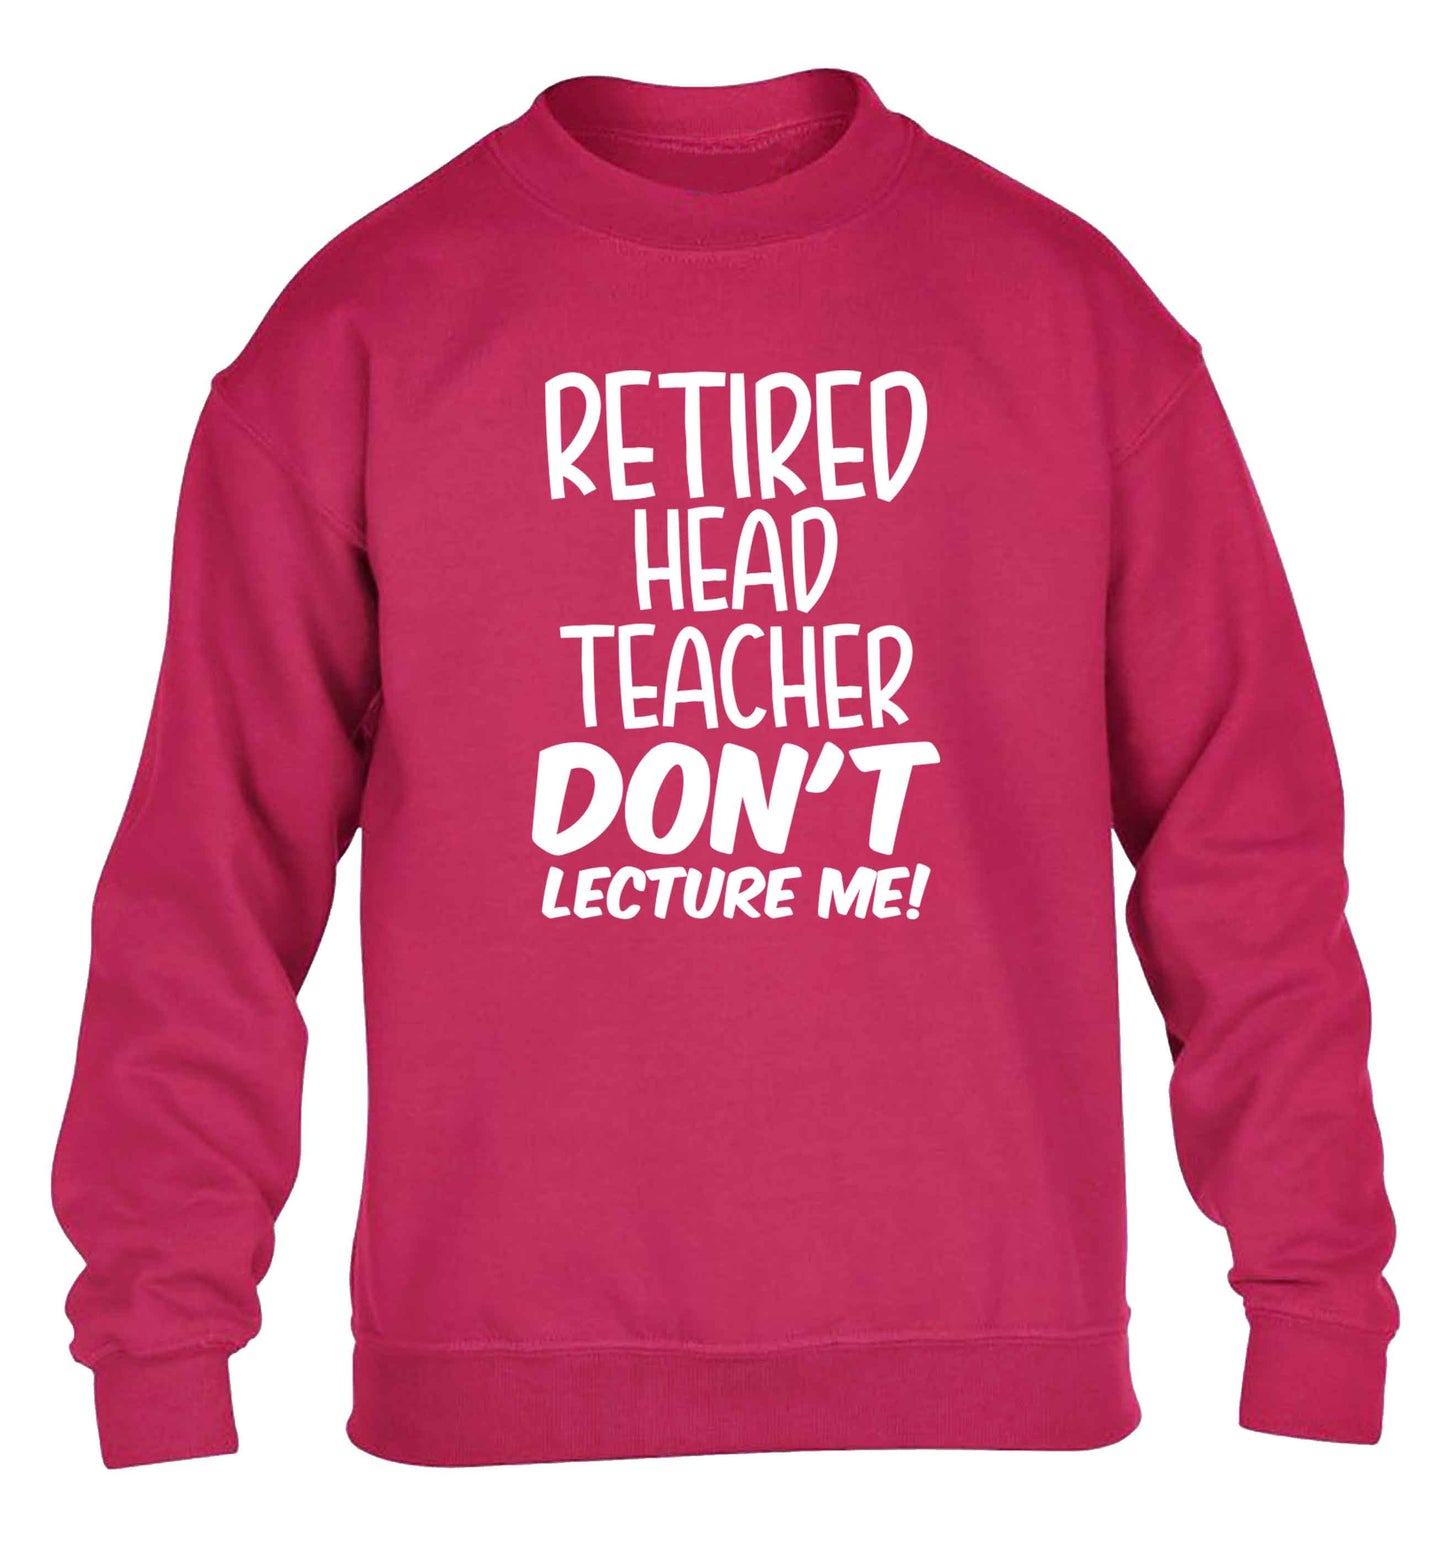 Retired head teacher don't lecture me! children's pink sweater 12-13 Years